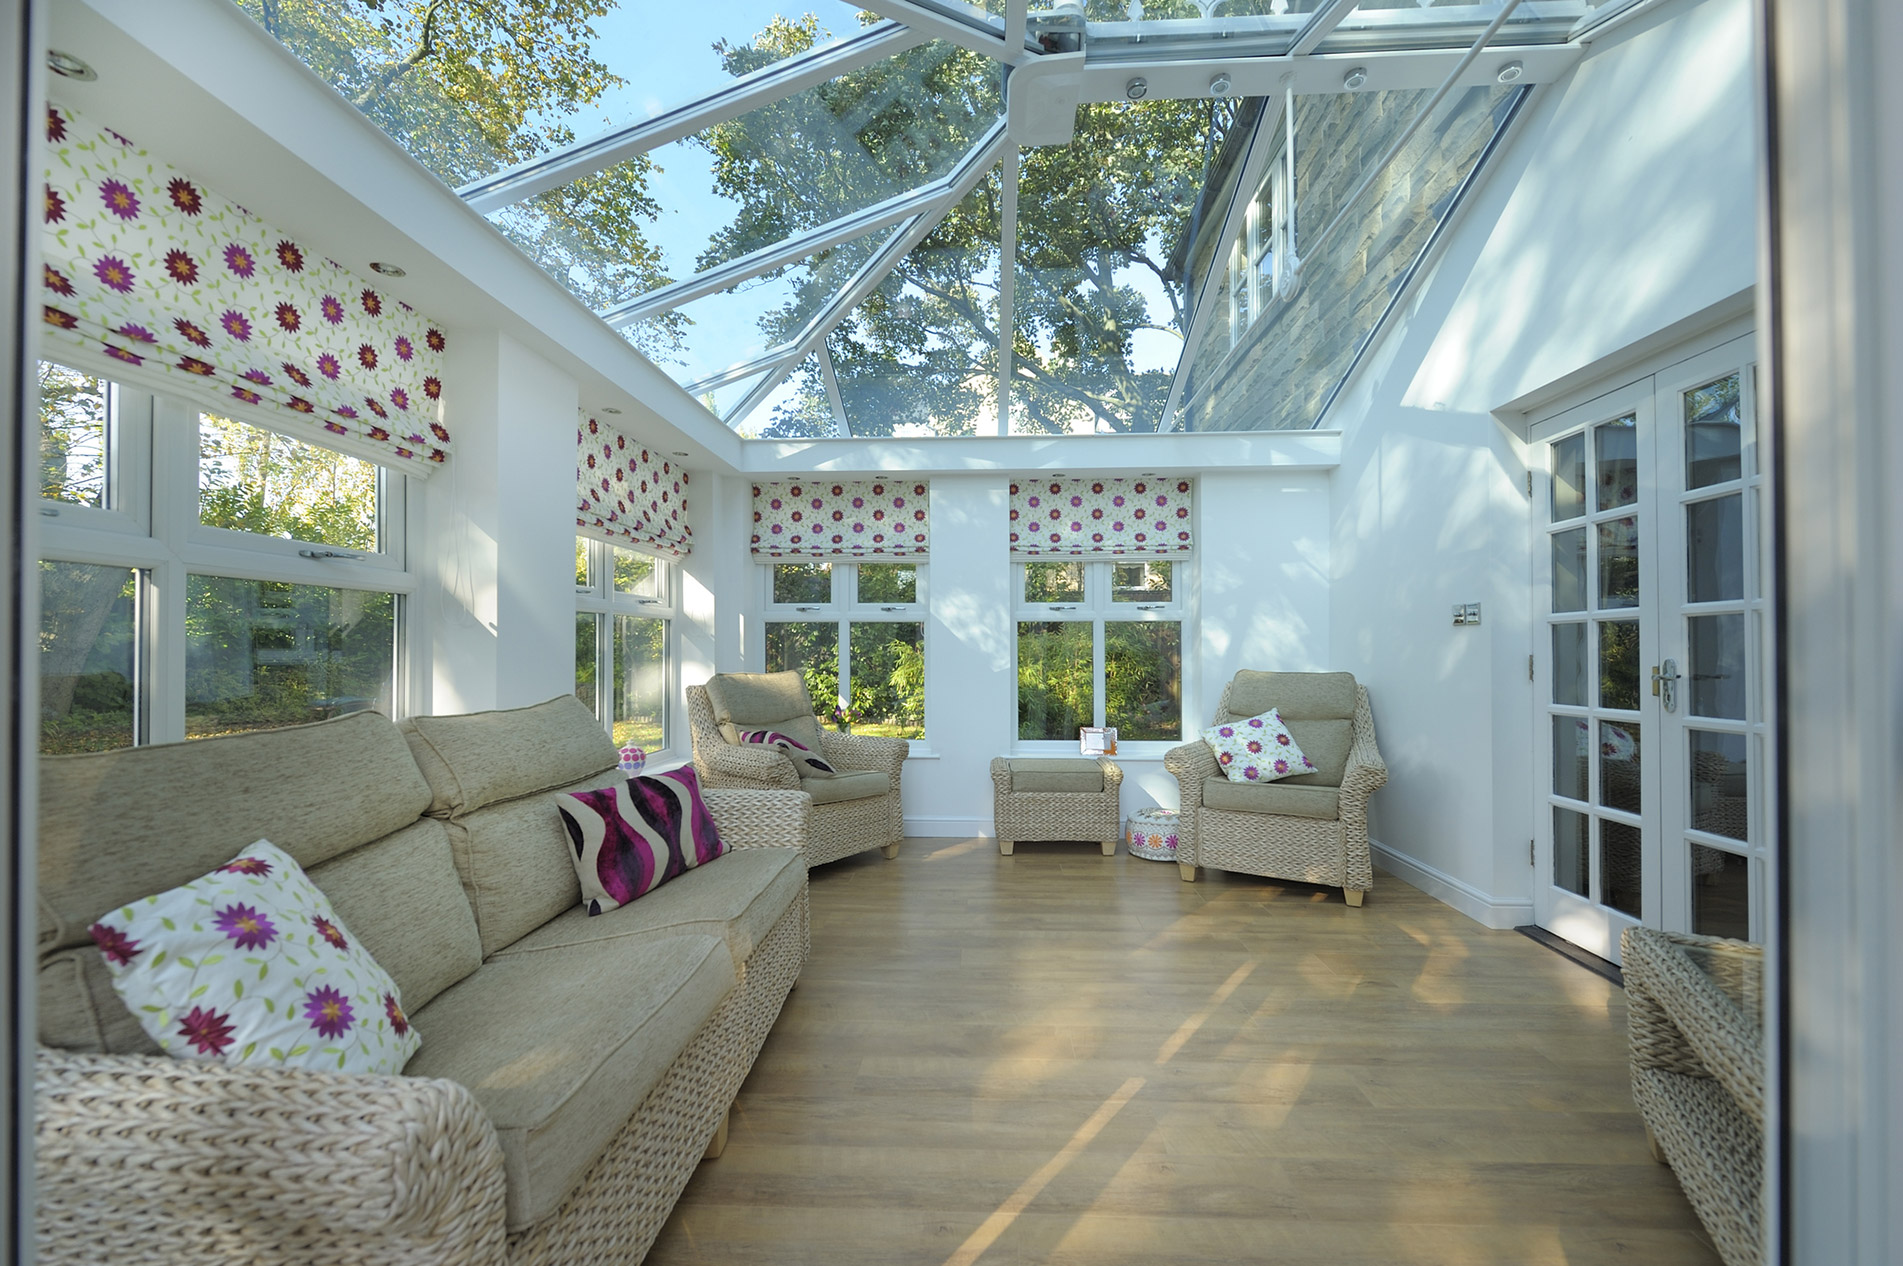 How To Upgrade an Orangery